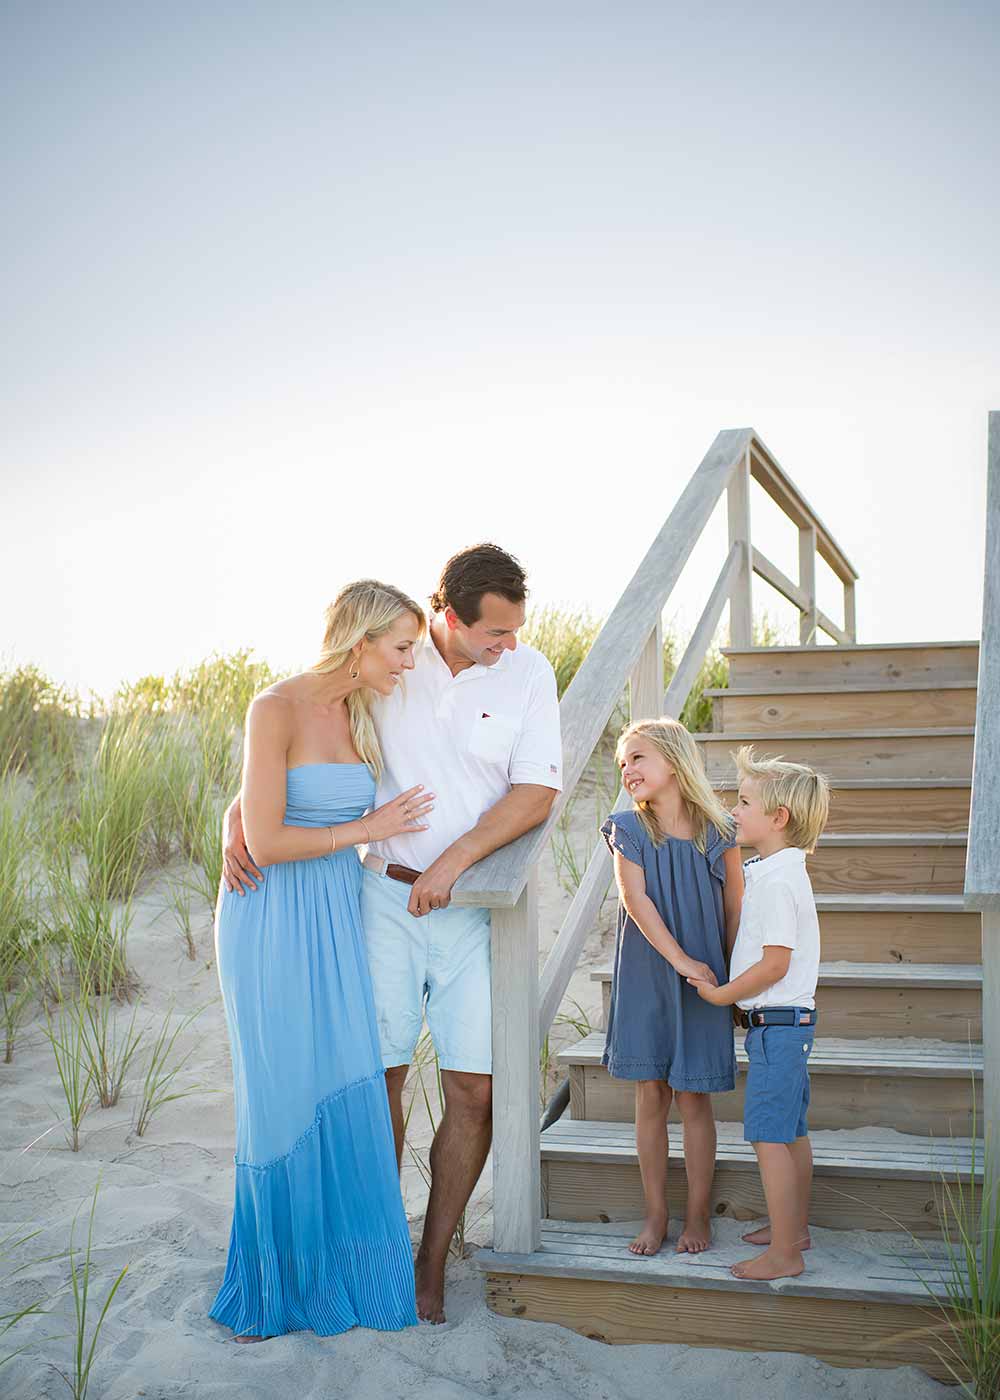 Candid family moment taken on a beach in the Hamptons